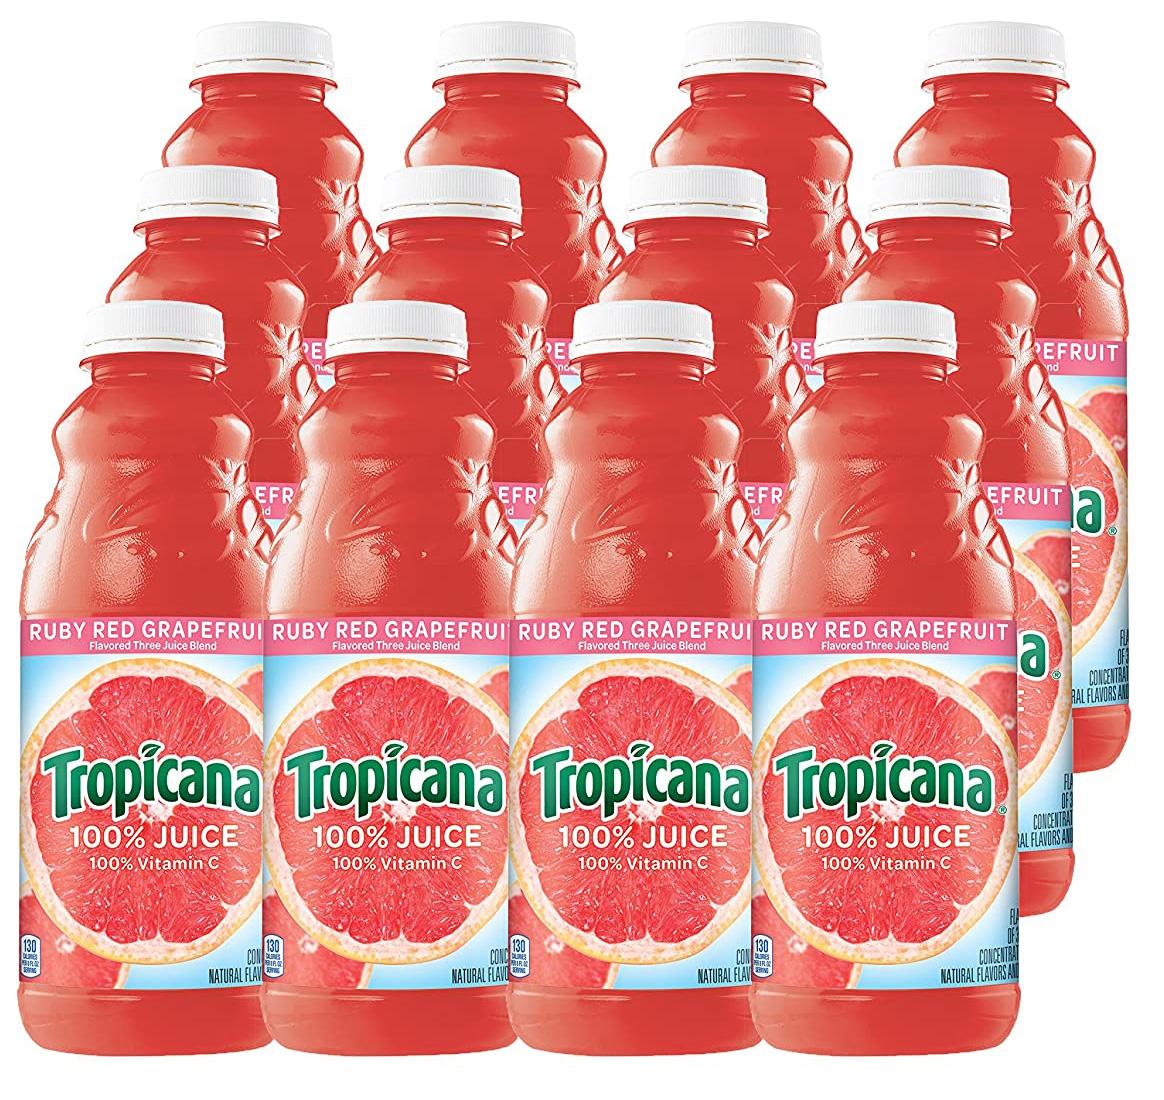 12 Tropicana Ruby Red Grapefruit Juice 32oz Bottles for $19.84